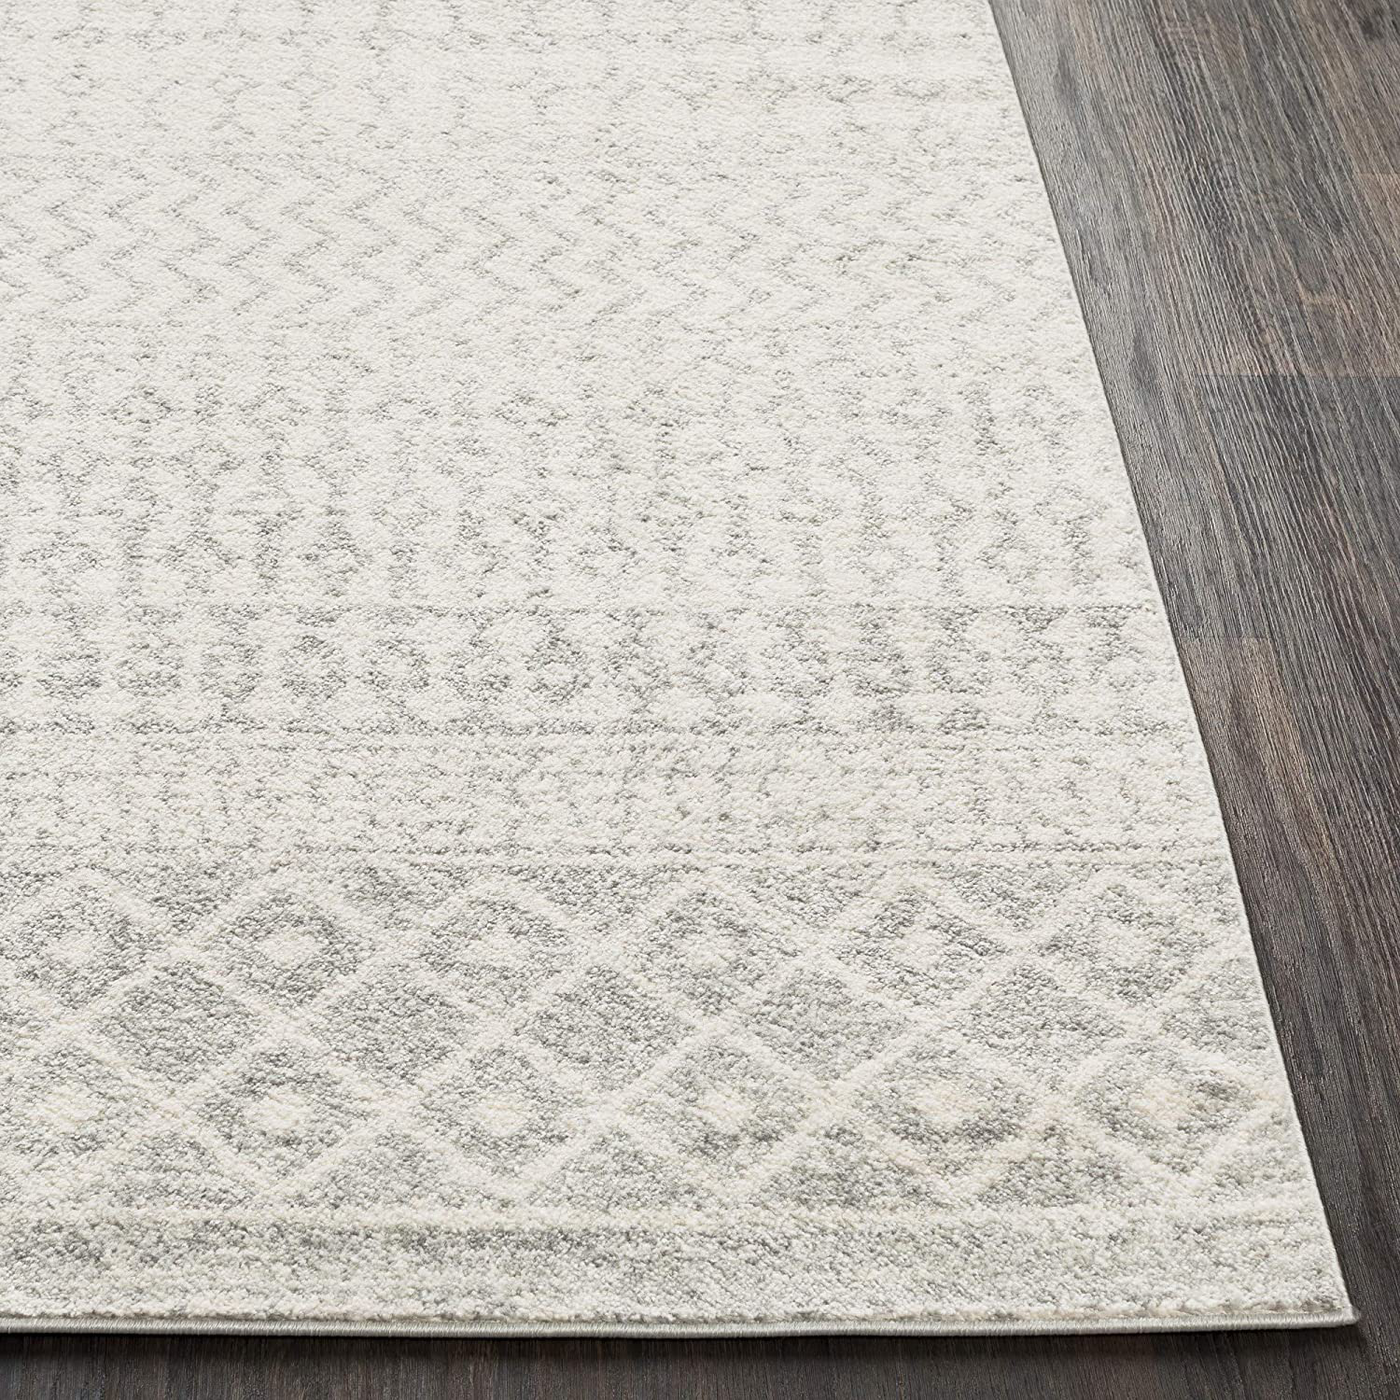 Artistic Weavers Chester Grey Area Rug, 3'11" x 5'7"